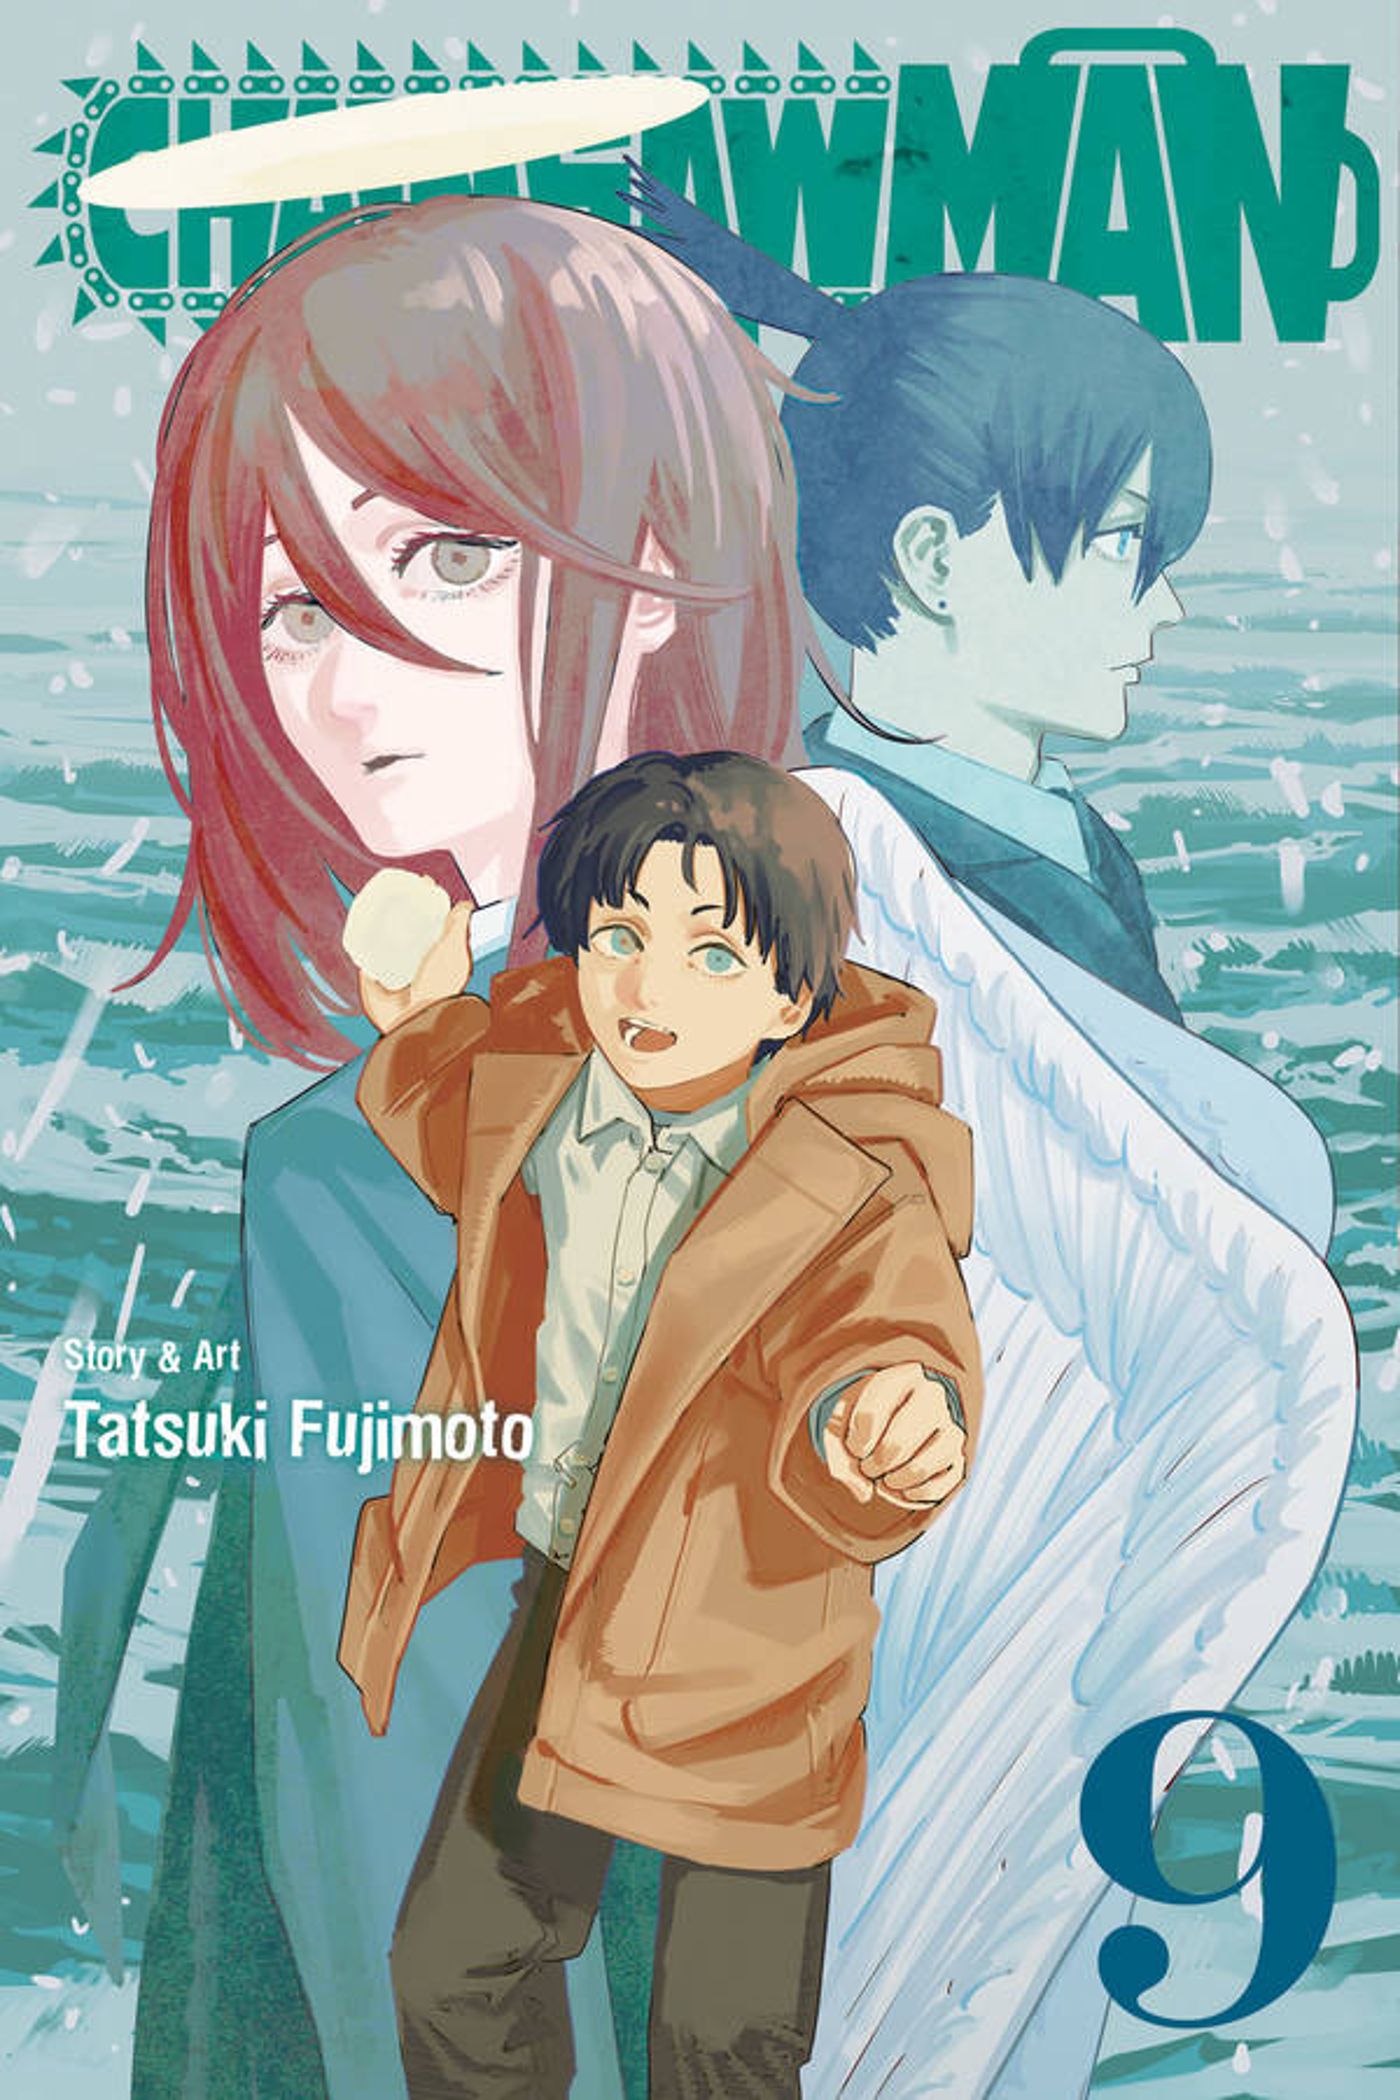 Chainsaw Man Volume 9 cover showing Aki, the Angel Devil, and a young Aki throwing a snowball in a snow storm.